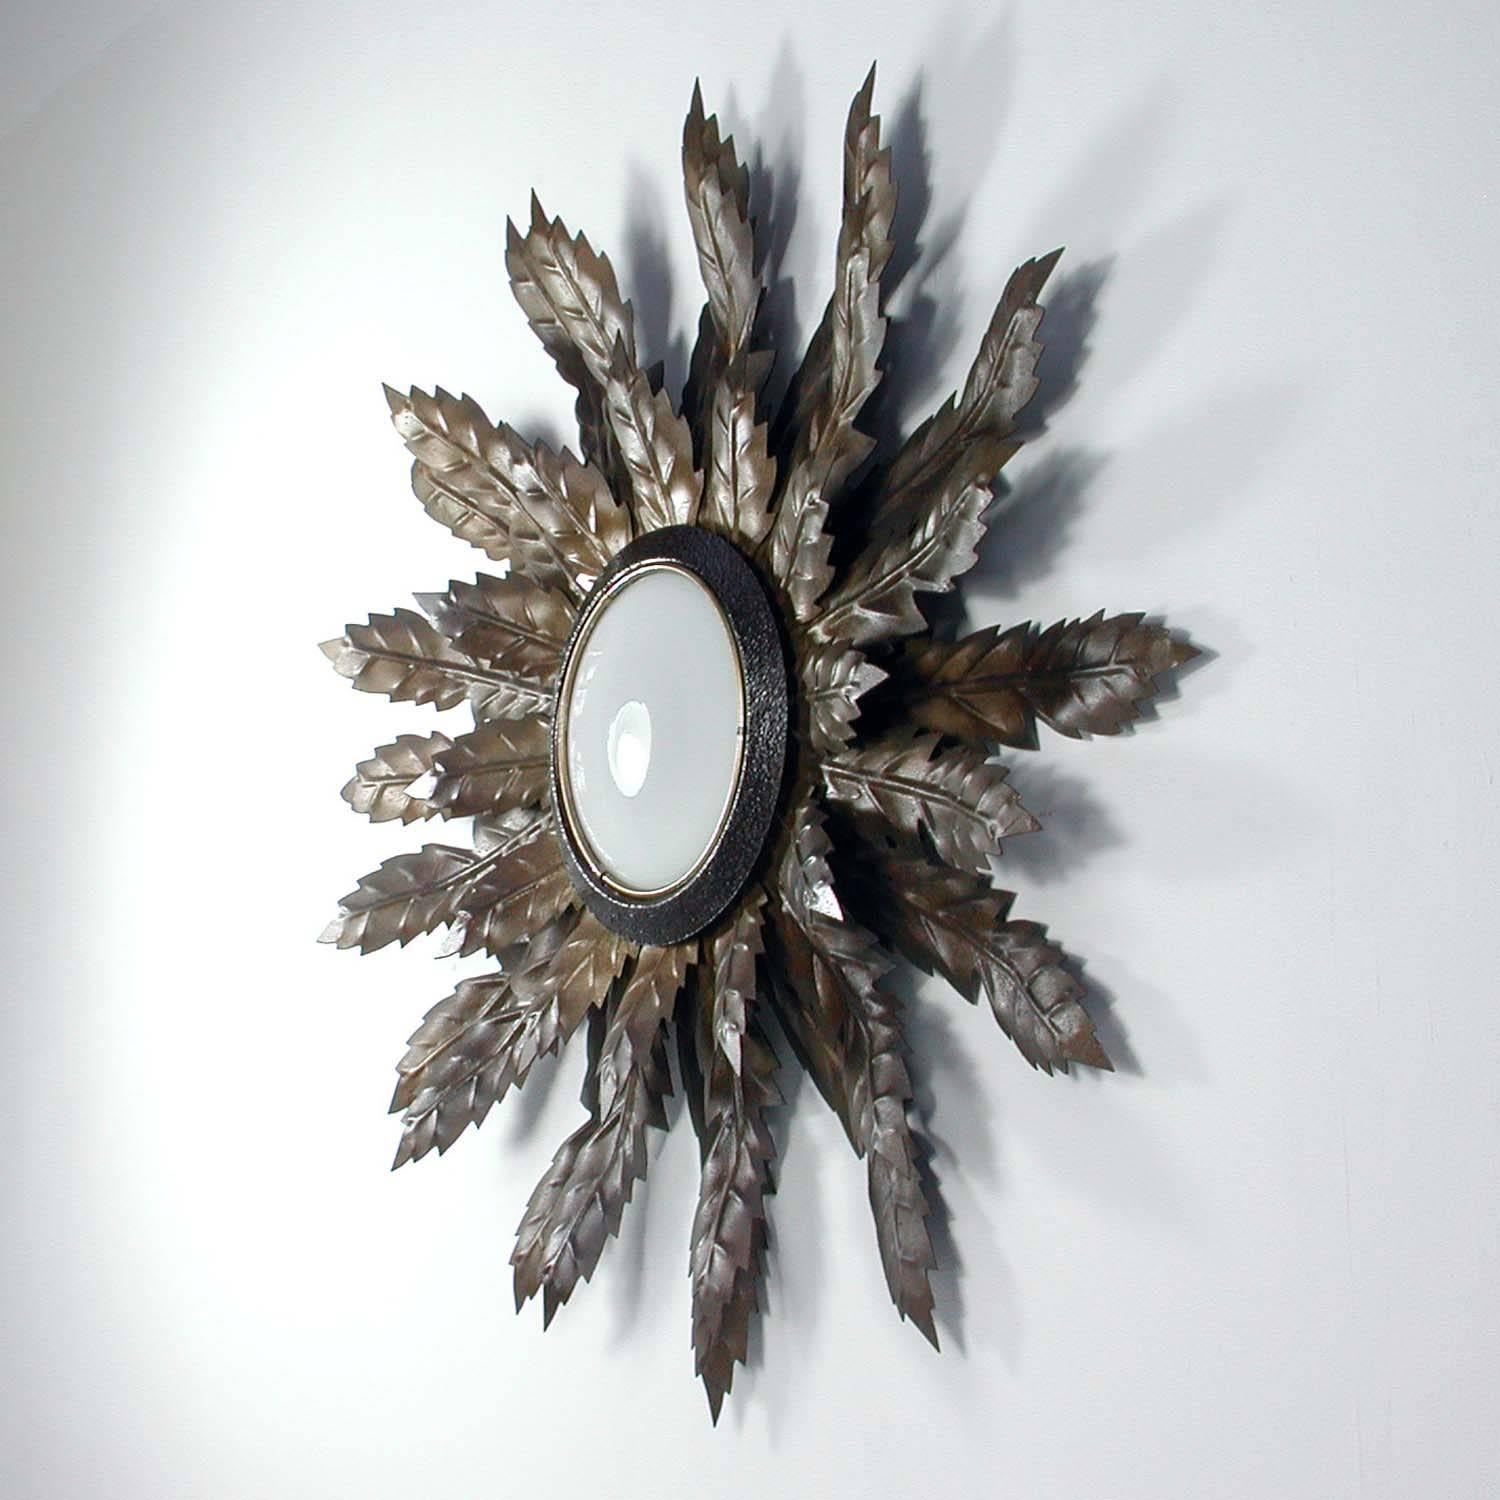 This Mid-Century sunburst sconce was produced in Spain in the 1950s. It is made of bronzed metal and has got a round opal glass lampshade.